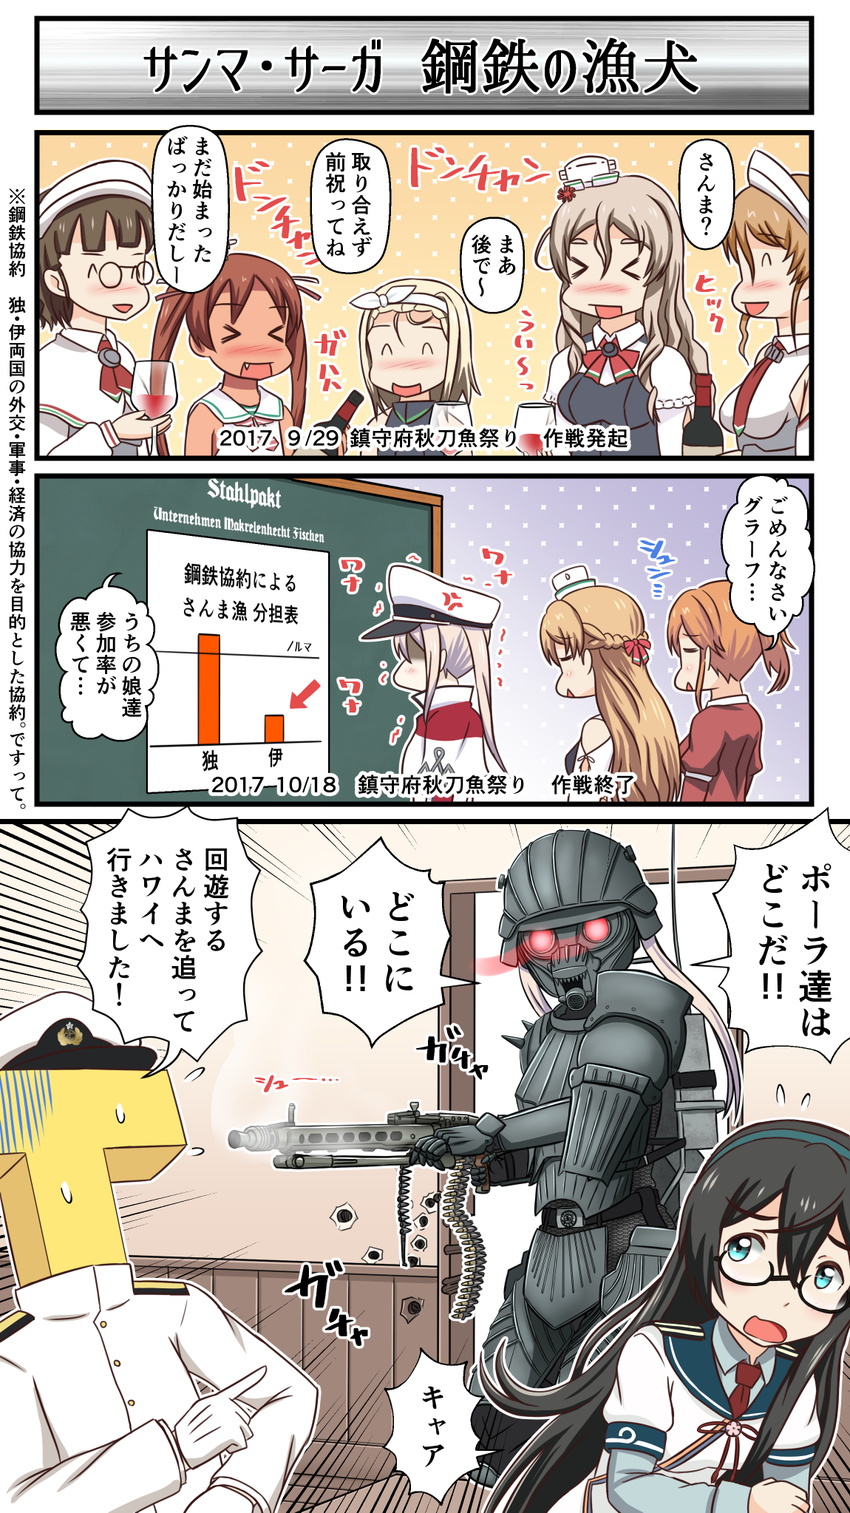 6+girls aquila_(kantai_collection) armor black_hair blonde_hair blue_eyes blush bottle braid brown_hair bullet_hole capelet comic cup drinking_glass drunk french_braid gas_mask gauntlets glasses gloves graf_zeppelin_(kantai_collection) grey_hair gun hat helmet highres holding holding_bottle holding_cup holding_gun holding_weapon jin_roh kantai_collection libeccio_(kantai_collection) littorio_(kantai_collection) long_hair long_sleeves luigi_torelli_(kantai_collection) machine_gun mg42 military military_uniform multiple_girls naval_uniform ooyodo_(kantai_collection) orange_hair pauldrons peaked_cap pola_(kantai_collection) protect-gear red_eyes roma_(kantai_collection) school_uniform serafuku short_hair t-head_admiral translation_request tsukemon twintails uniform weapon white_gloves wine_bottle wine_glass yellow_eyes zara_(kantai_collection)